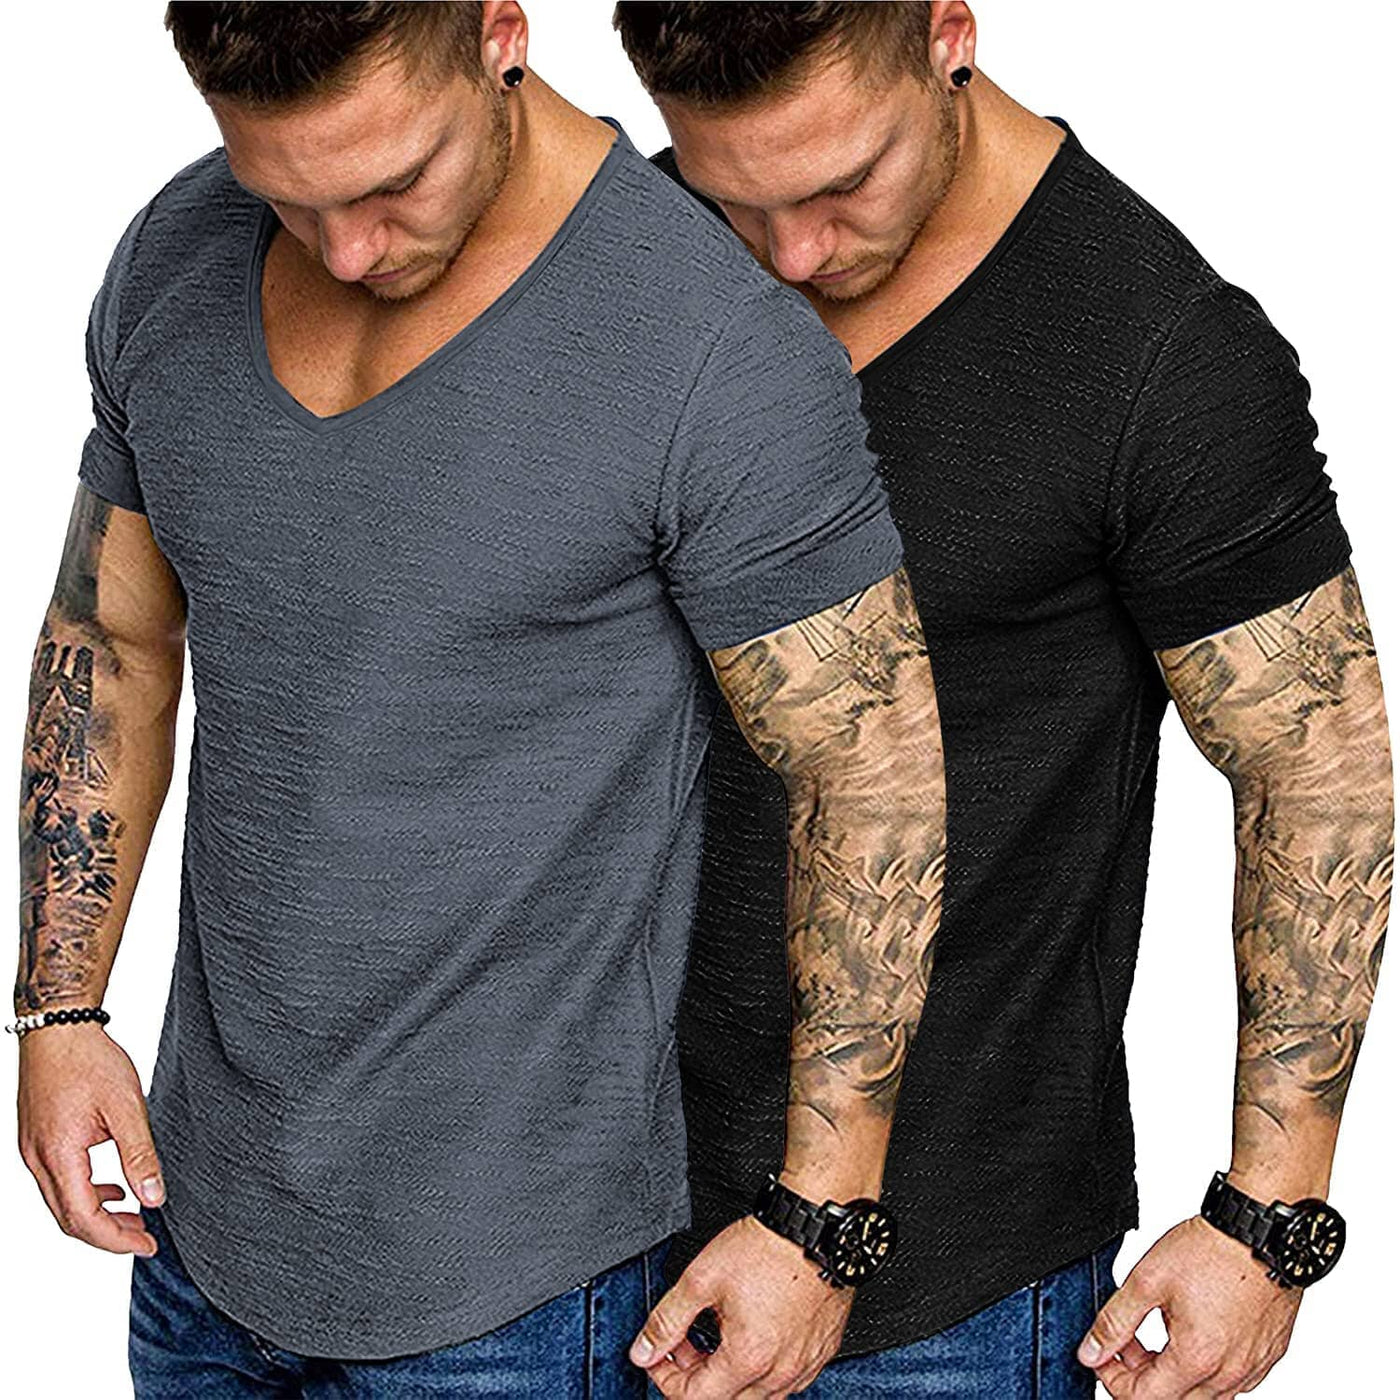 Coofandy 2 Pack Muscle T Shirt (US Only) T-Shirt coofandy Black/ Grey S 